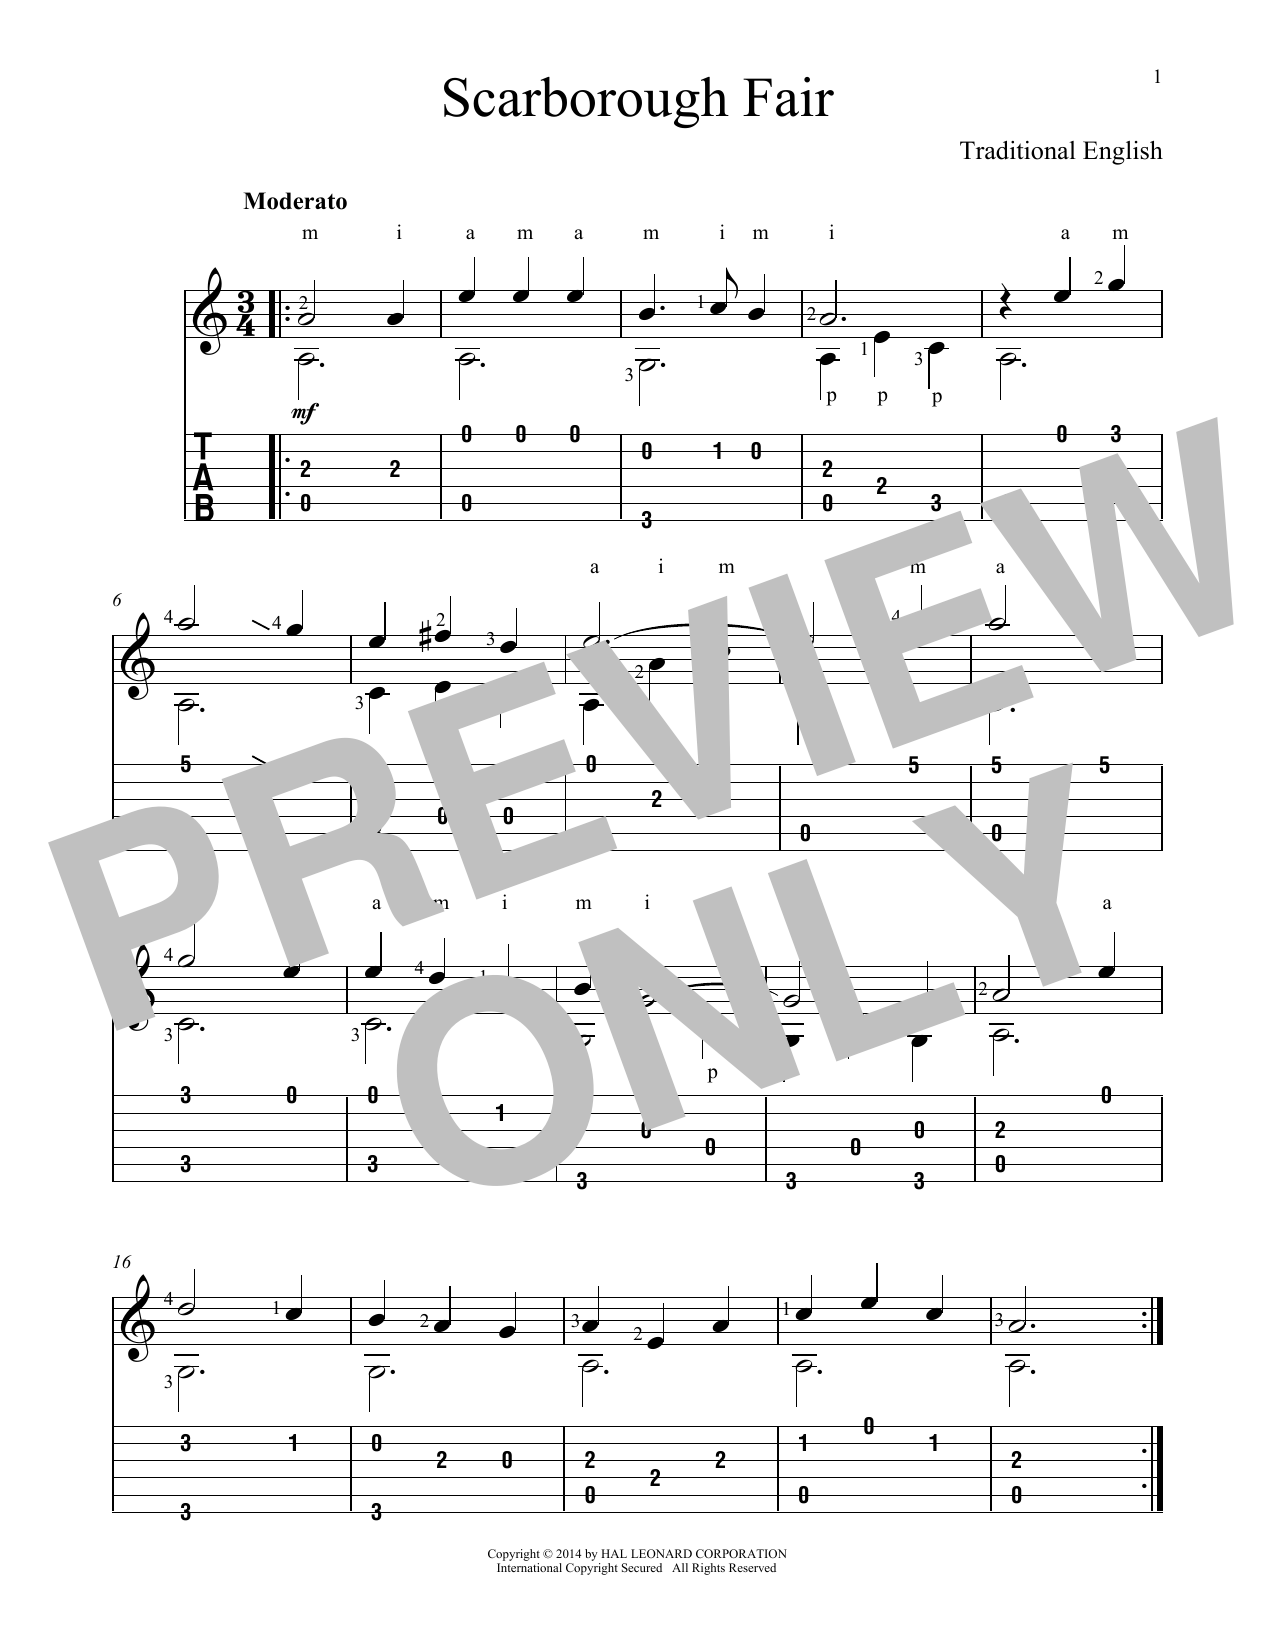 Download Traditional Scarborough Fair Sheet Music